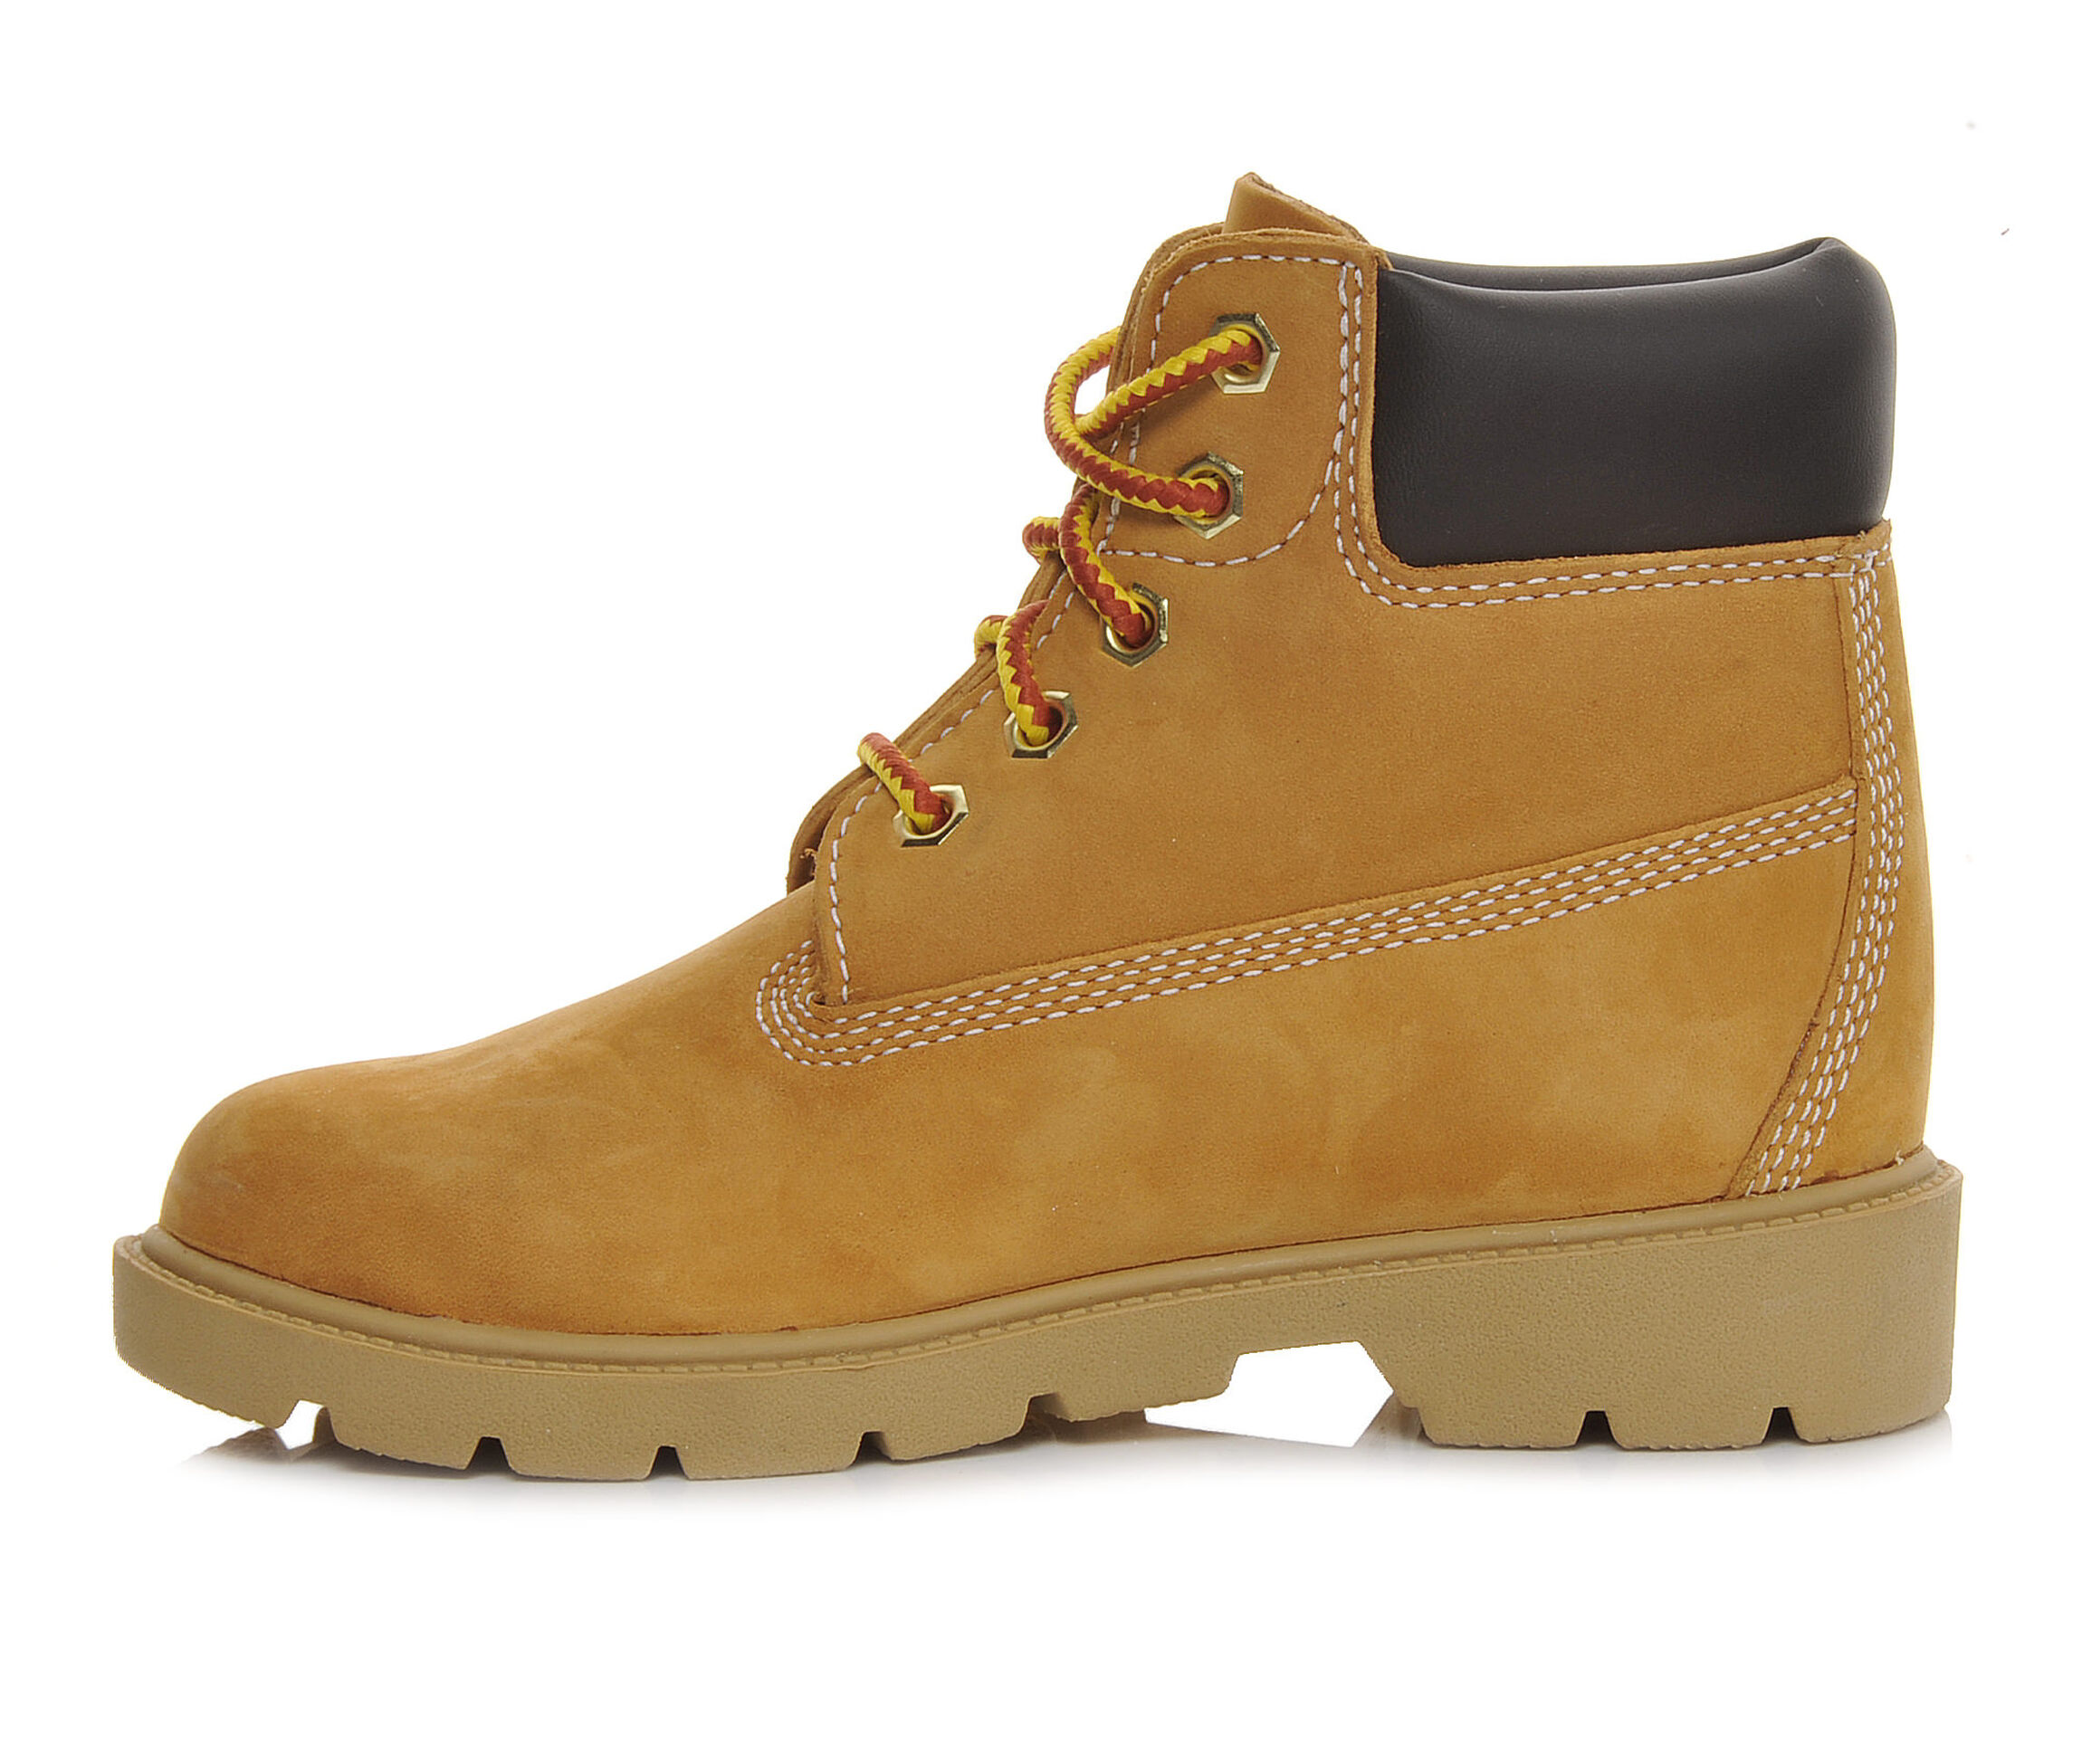 Kids' Timberland Shoes & Boots | Shoe Carnival